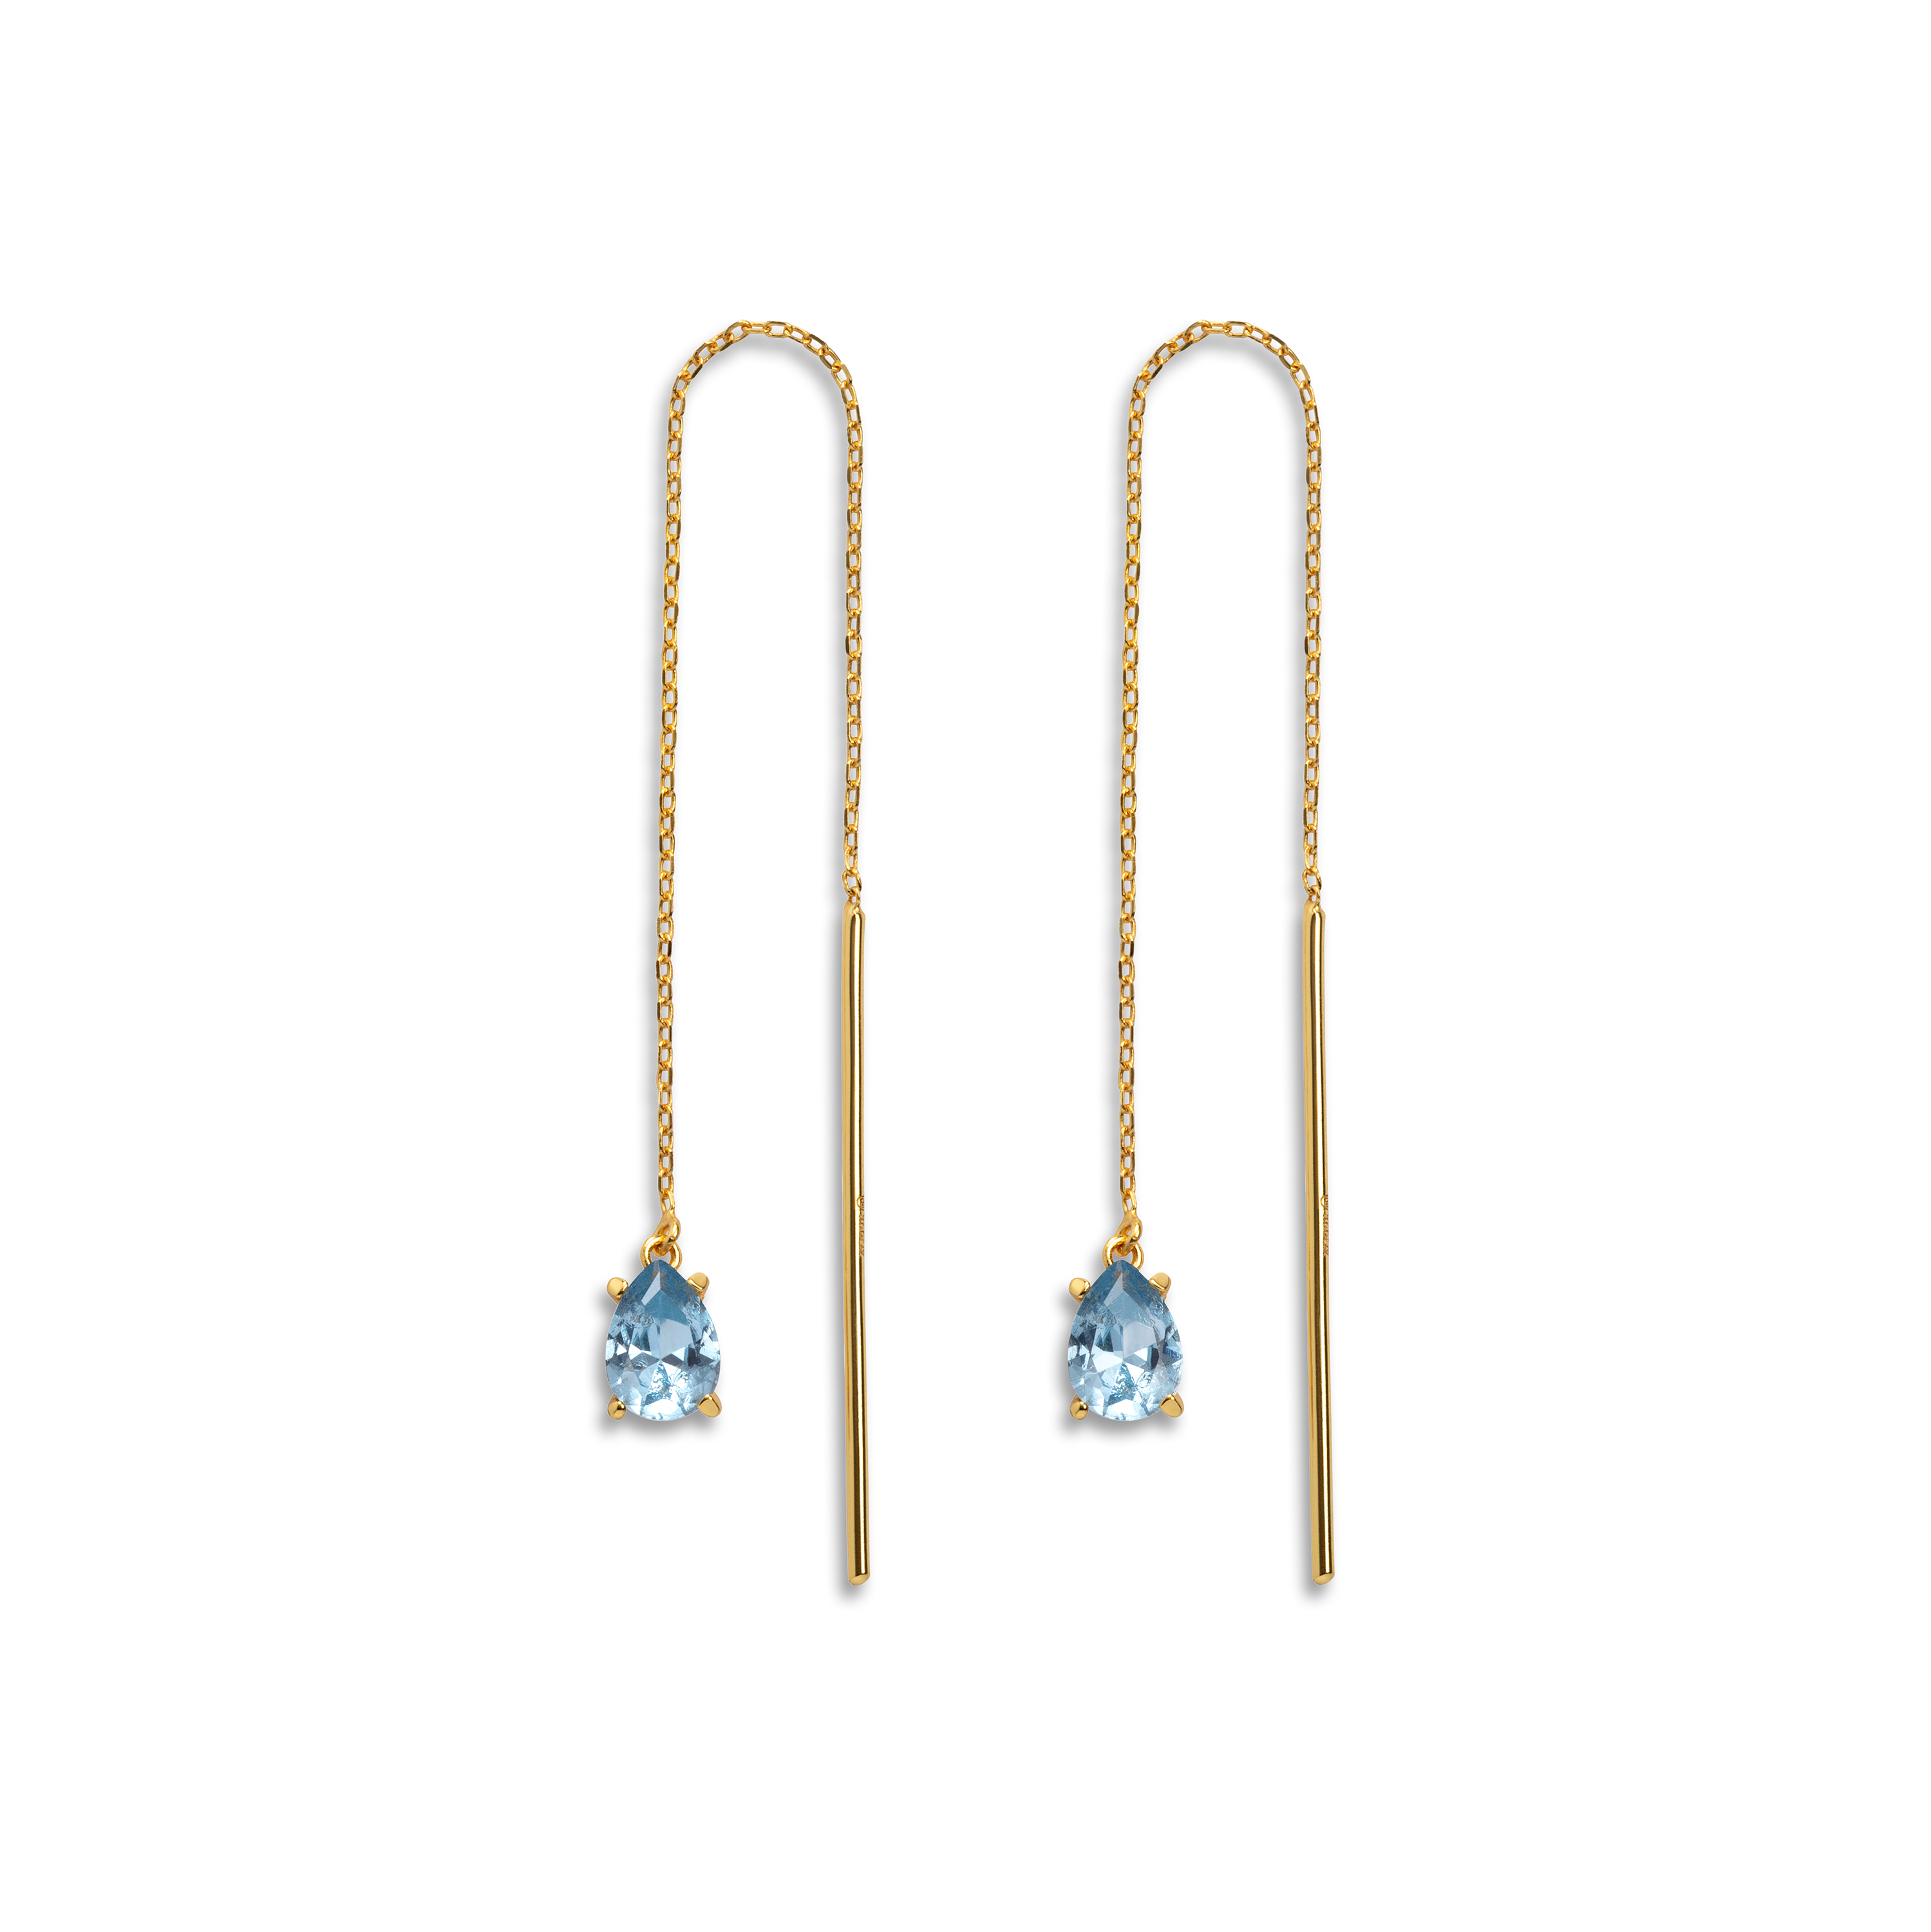 Boucles d'Oreilles Heart Of The Sea Argent Massif Or